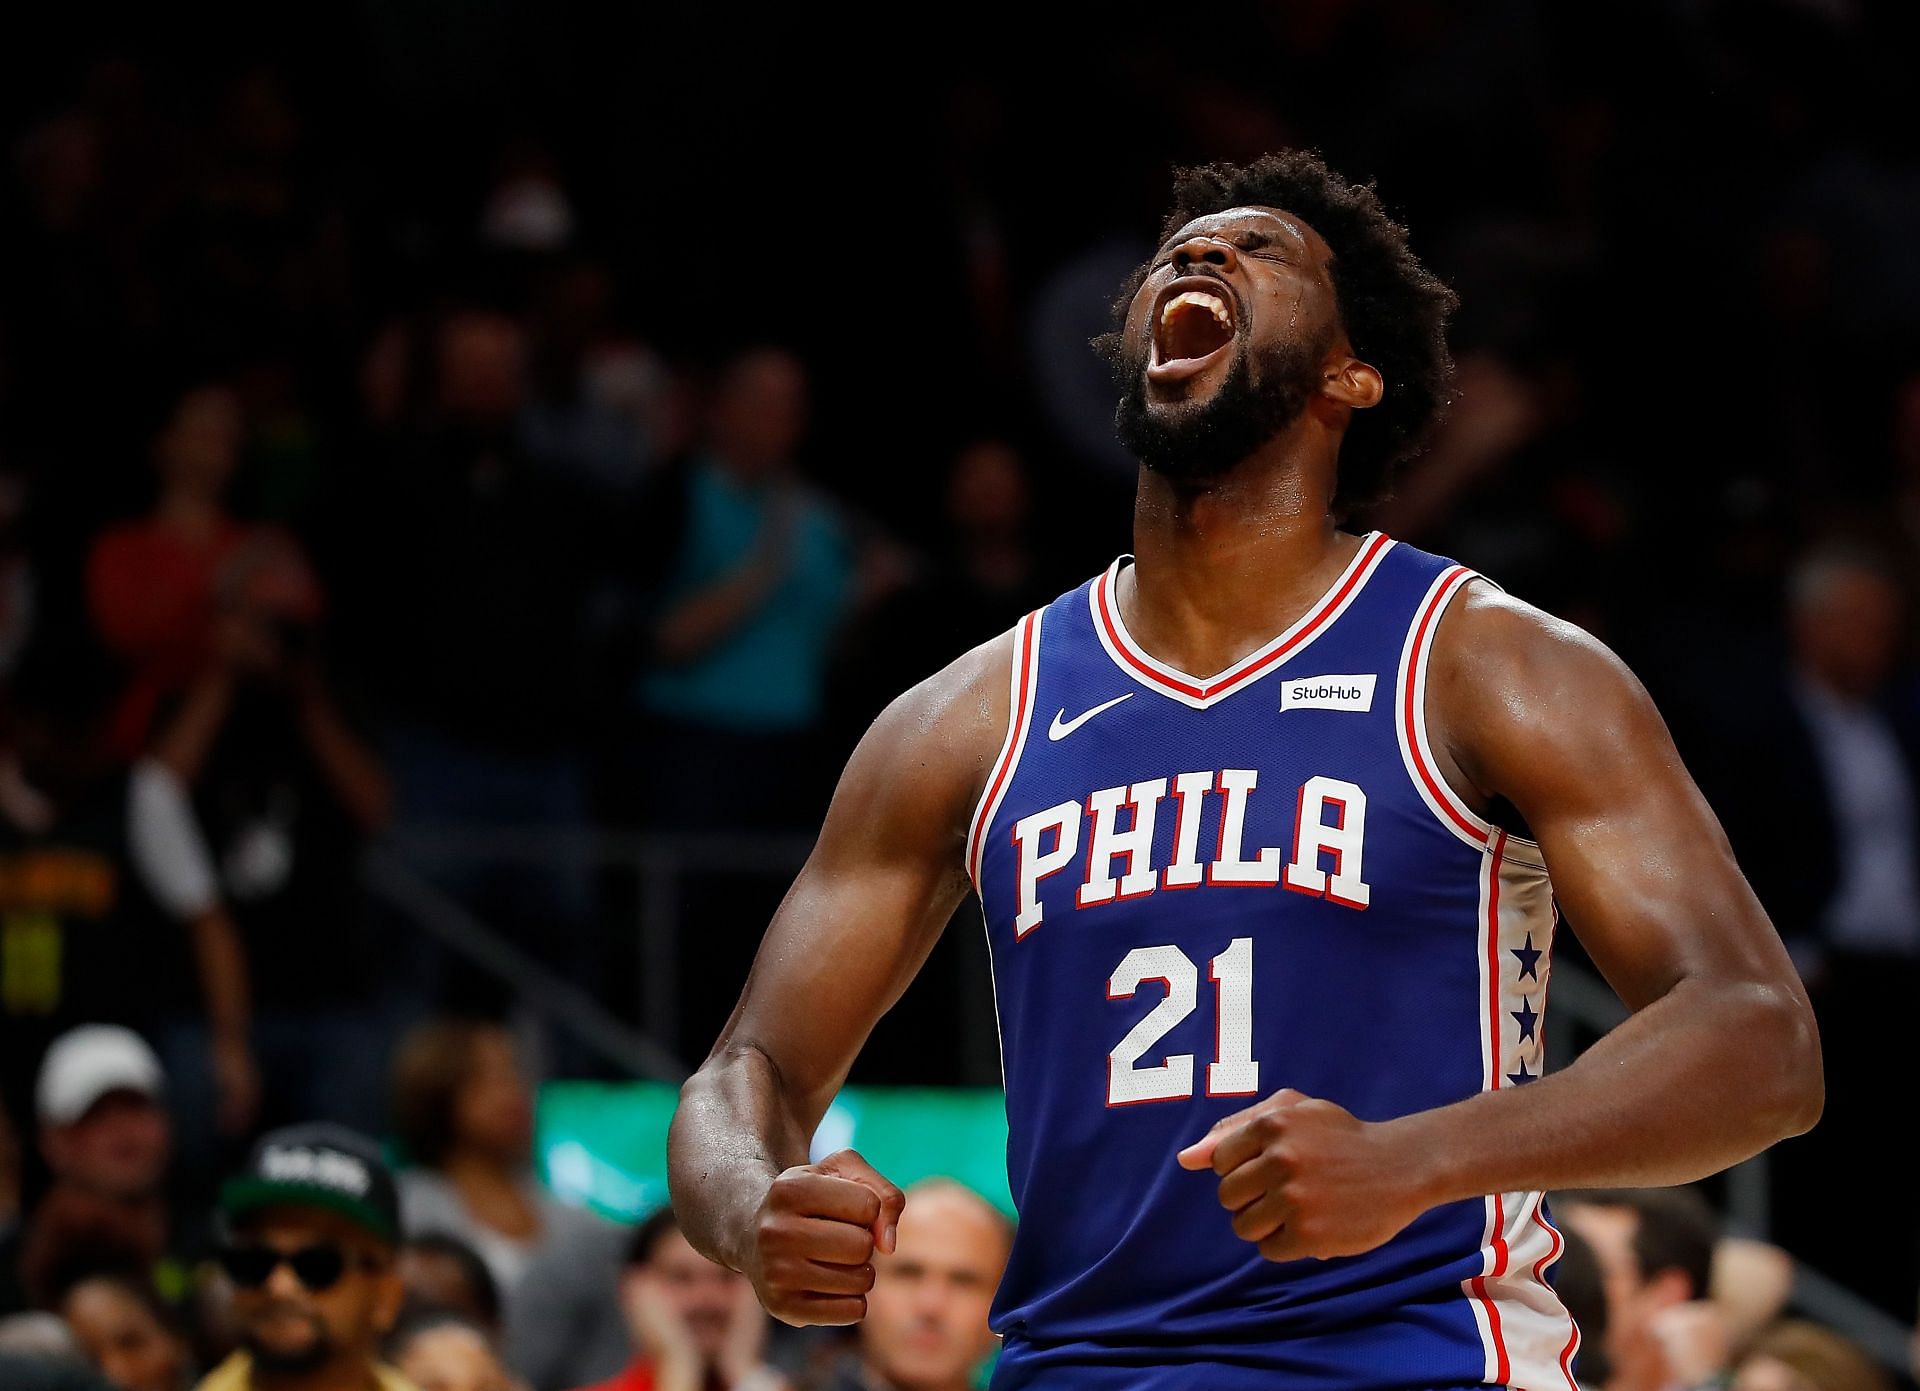 Could Joel Embiid play for the French national team?